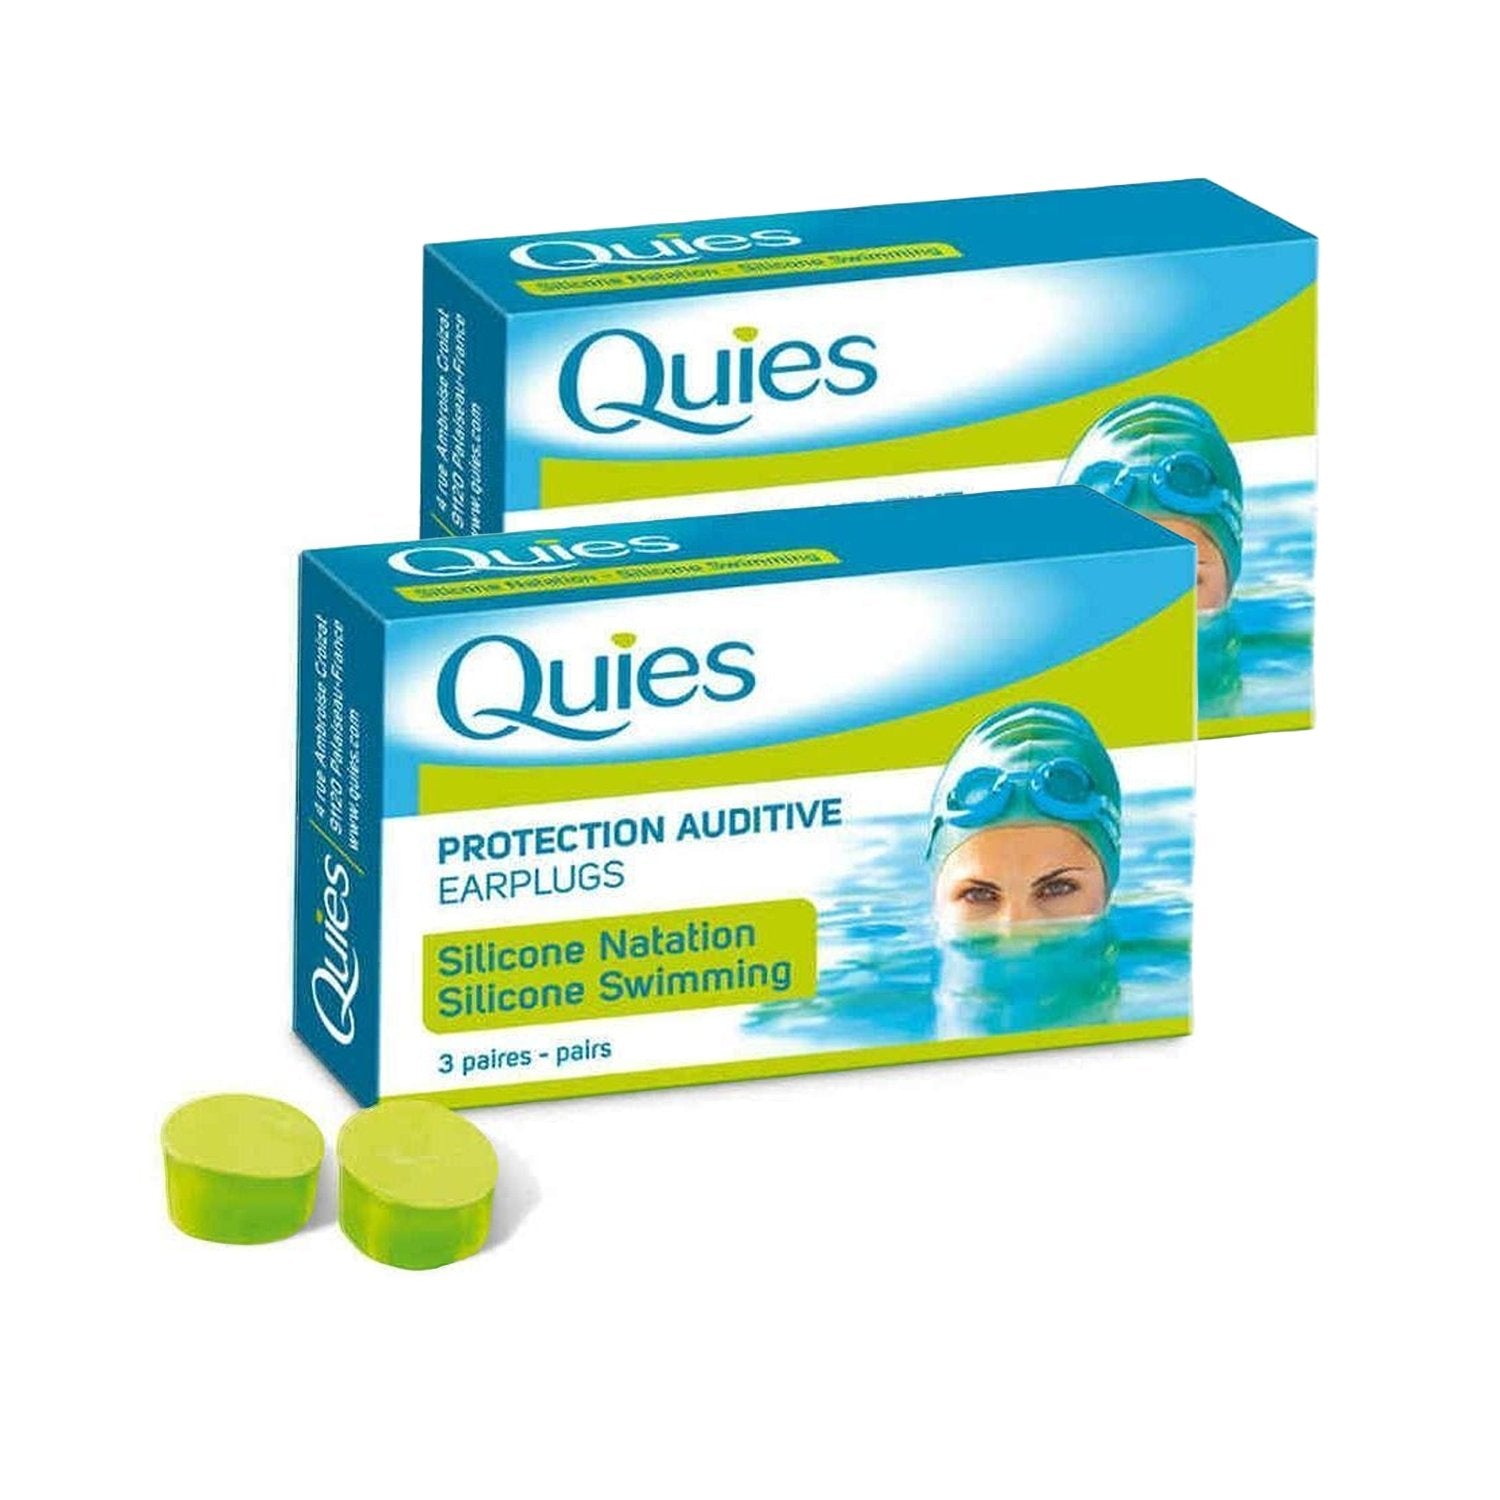 Quies Silicone Natation Swimming Earplugs - Adult - 2 Pack